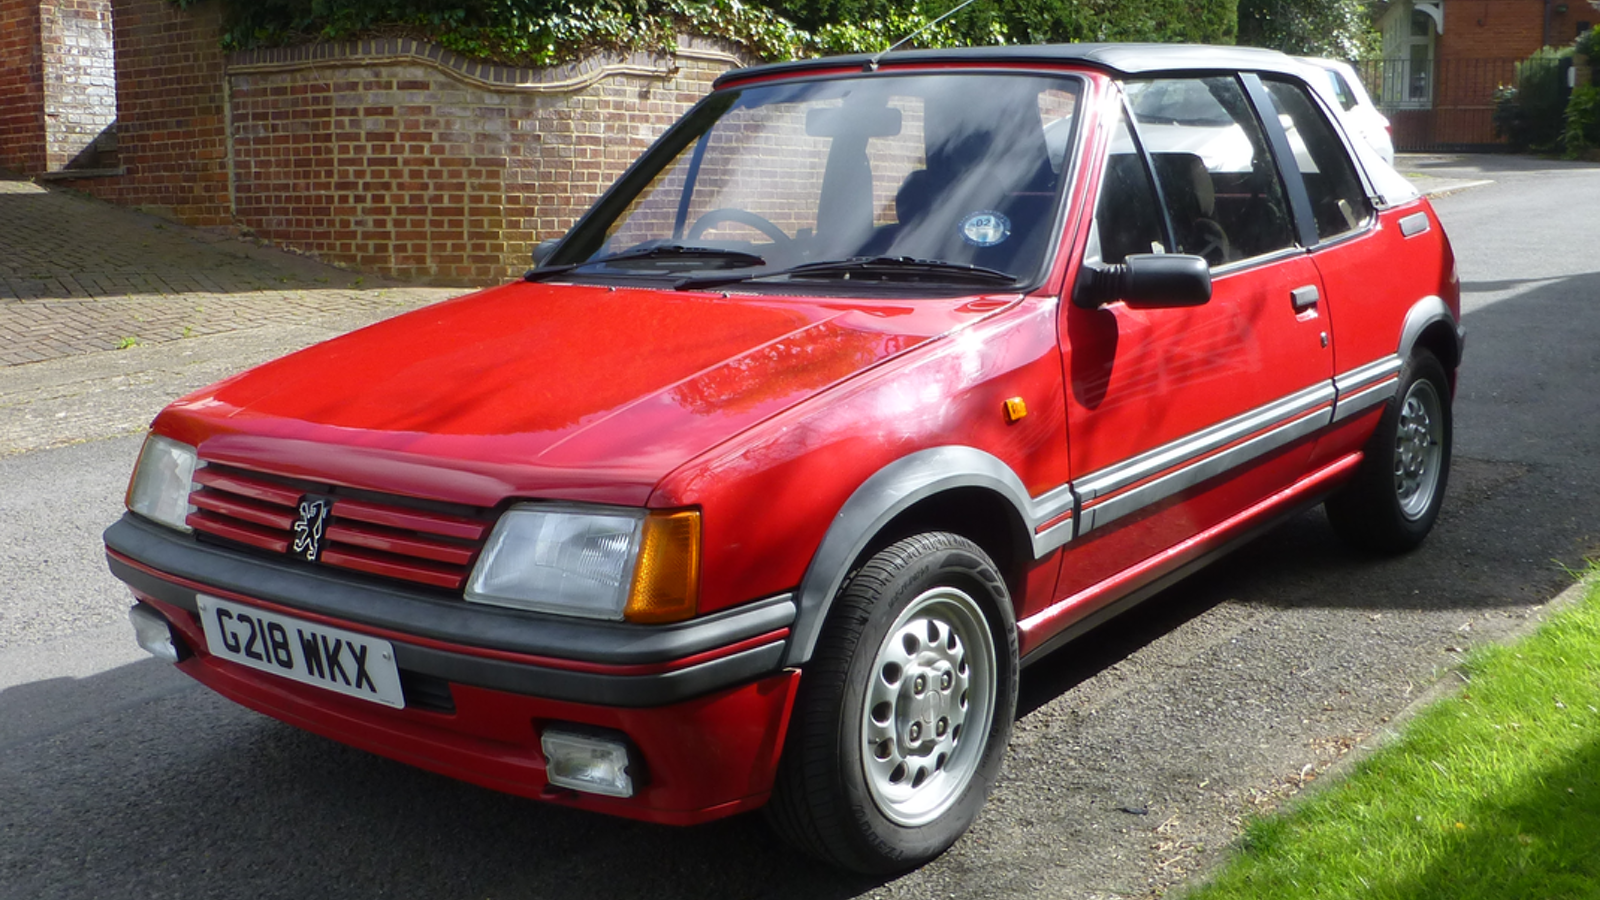 10 under £10K: bargain classics you can buy next week